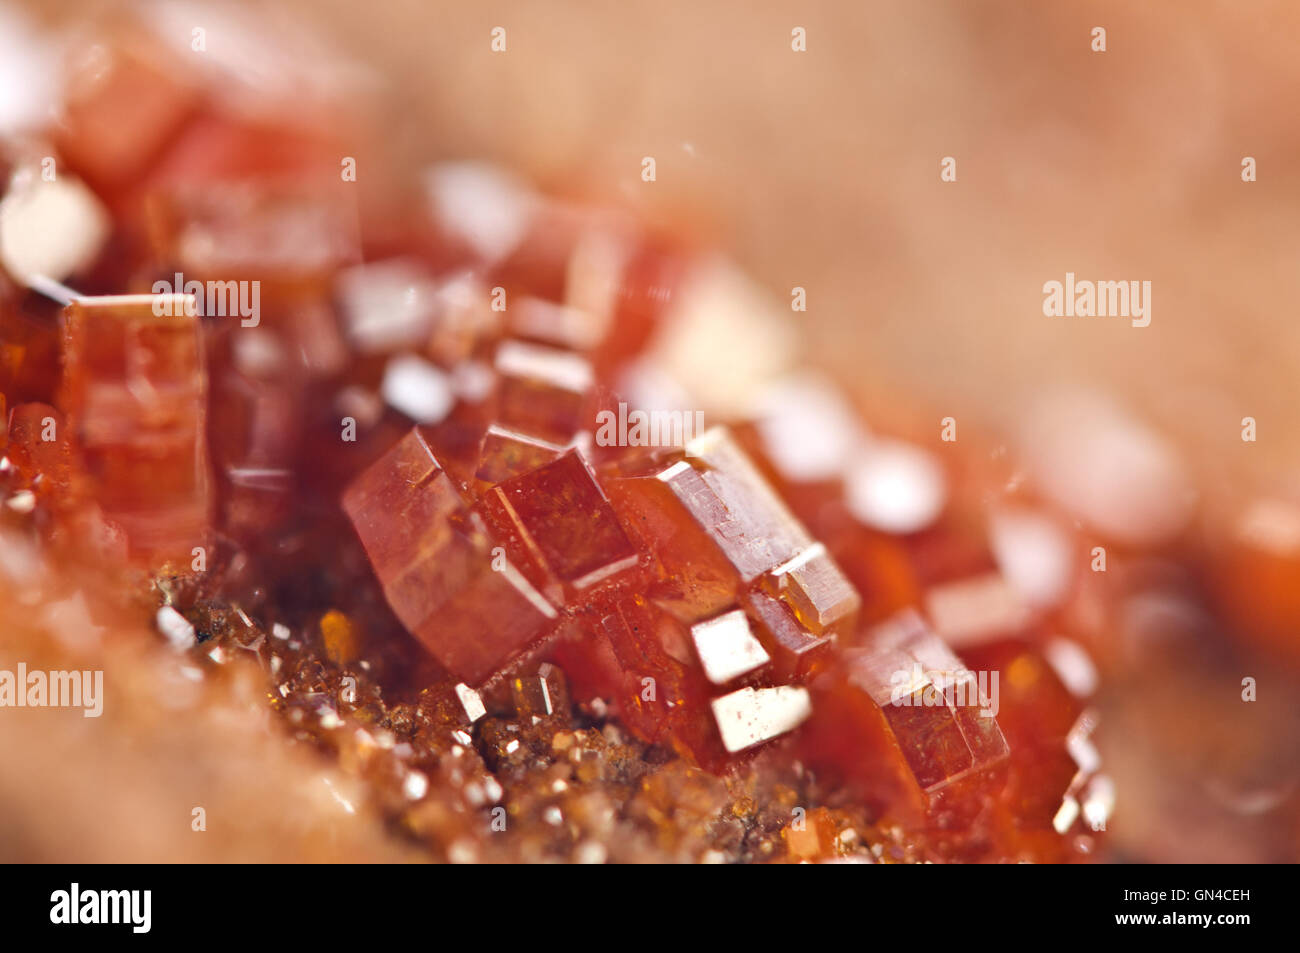 Crystals Vanadinite is a mineral belonging to the apatite group of phosphates,  chemical formula Pb5(VO4)3Cl.  Macro. Stock Photo